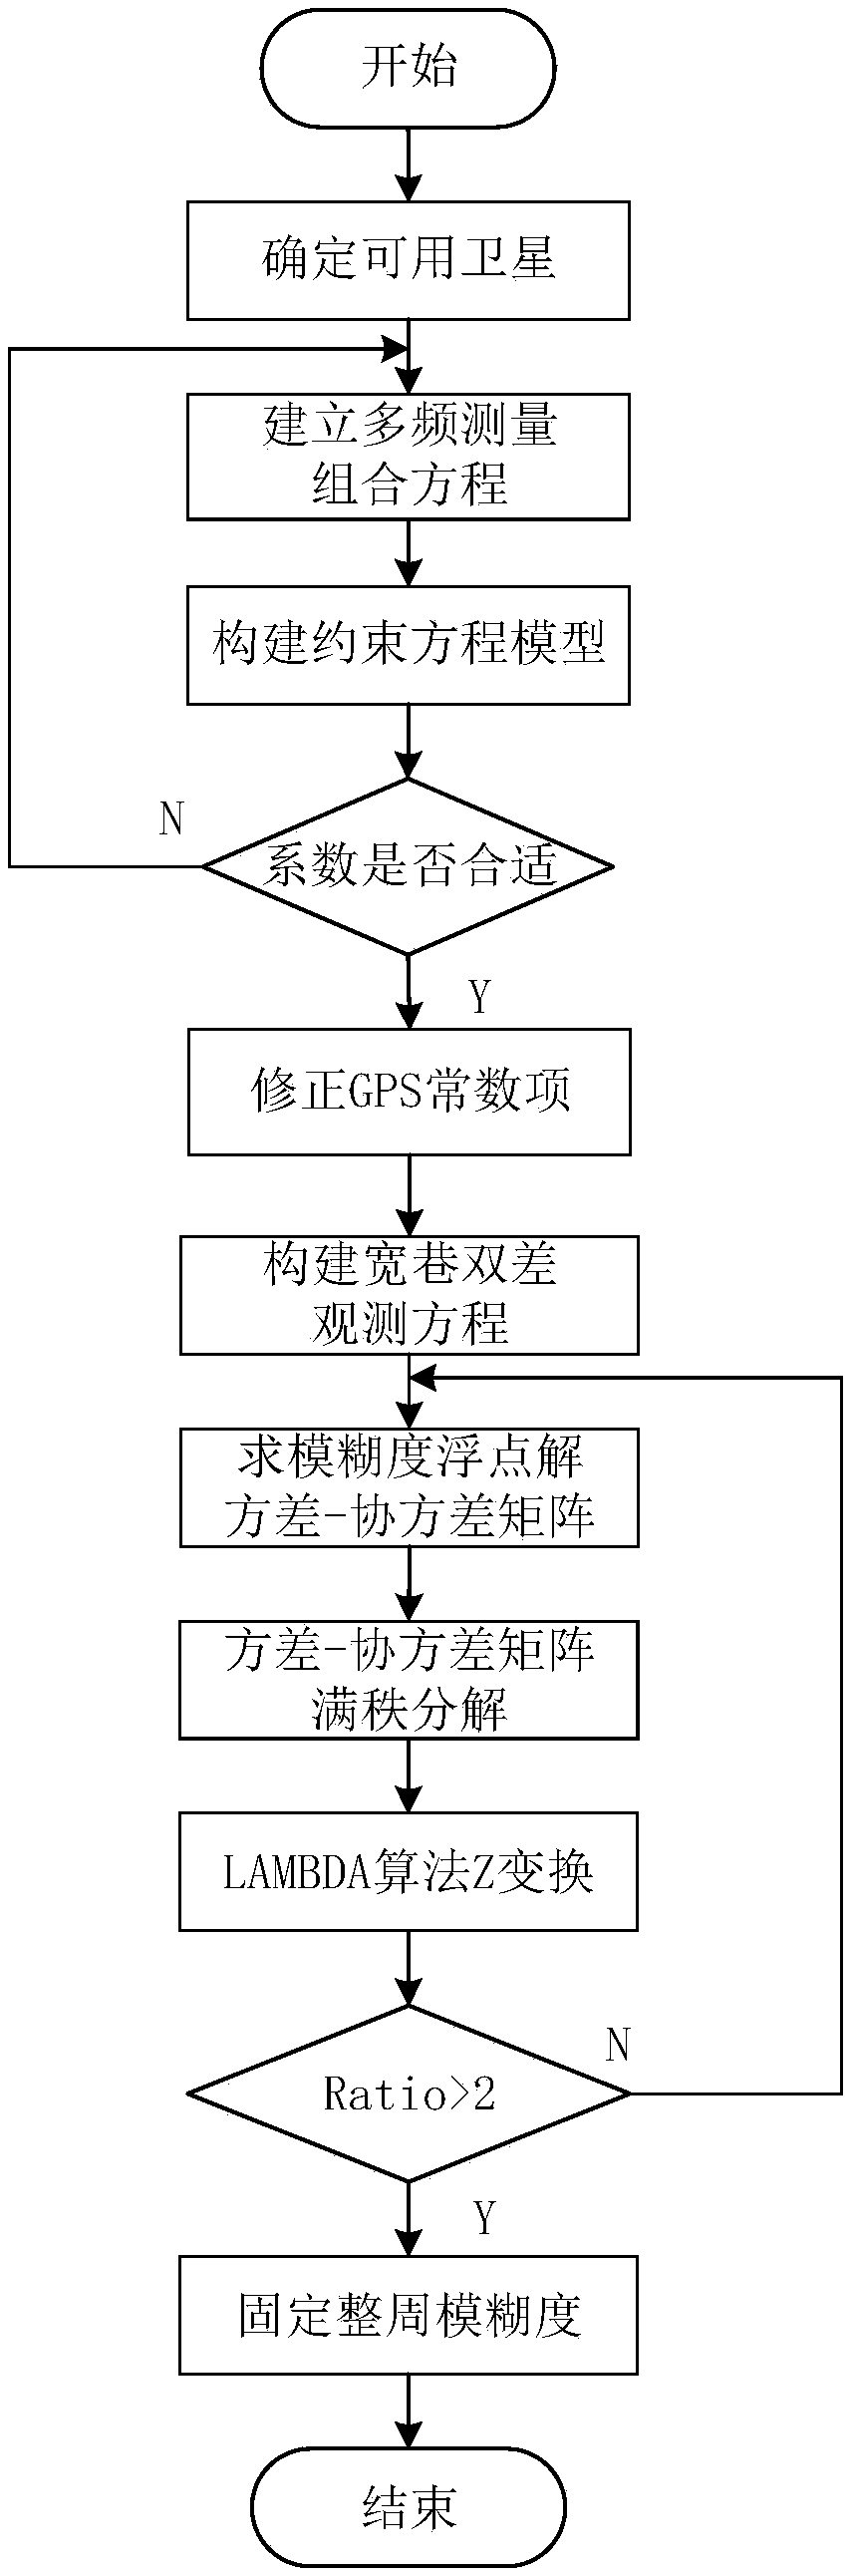 Method and system for fixing integer ambiguity